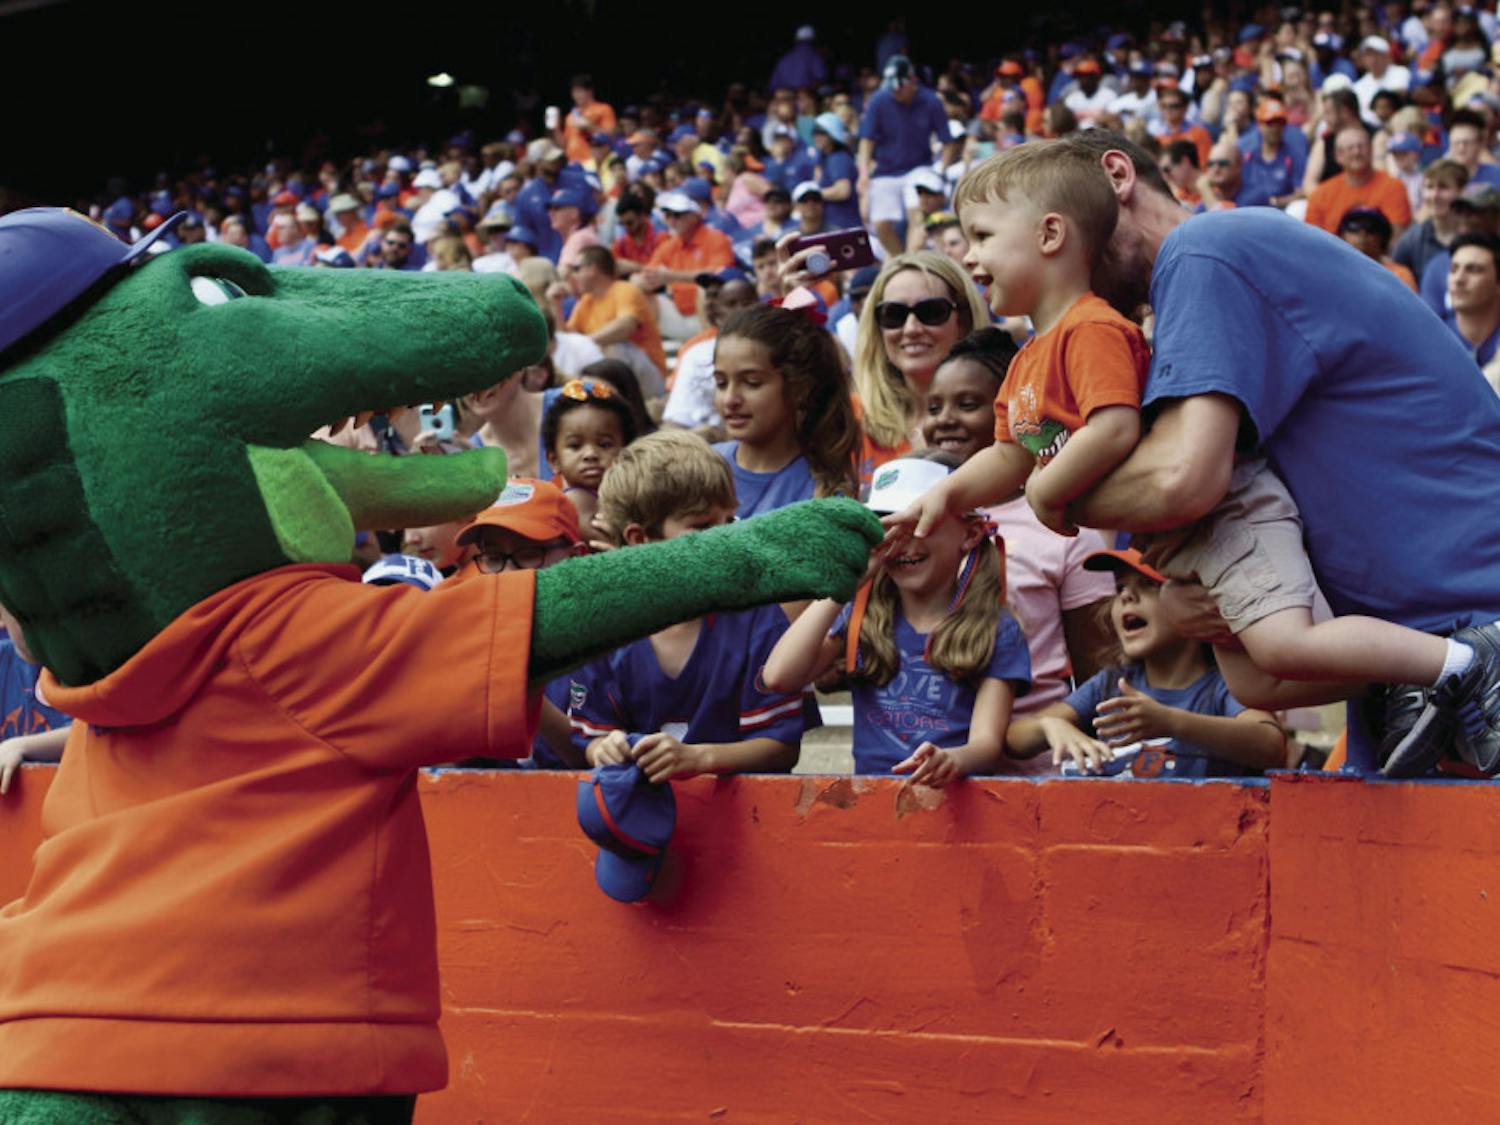 Albert E. Gator greets a young Gator fan during the Orange &amp; Blue football game in January 2019. The scrimmage held at Ben Hill Griffin Stadium had 53,015 in attendance.